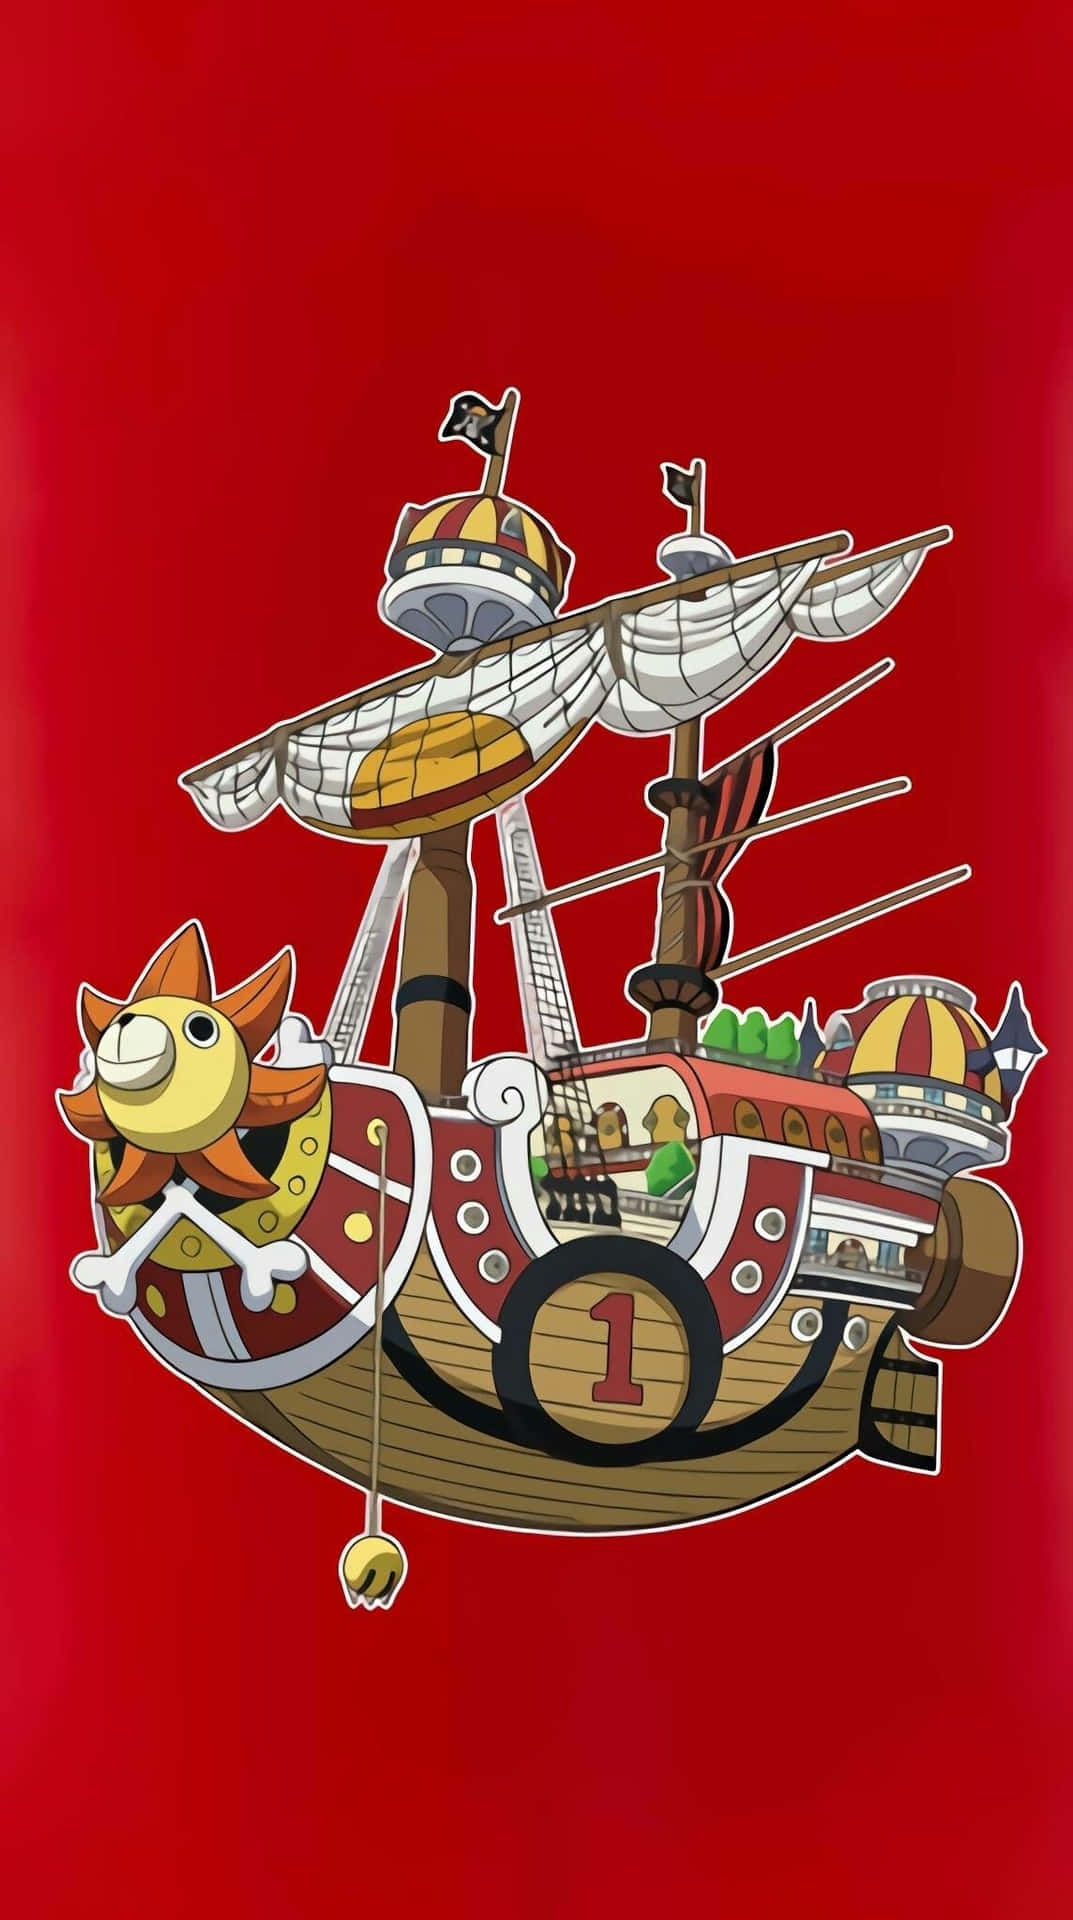 "Sailing Across the Endless Ocean, the Thousand Sunny Makes for a Spectacular Sight" Wallpaper